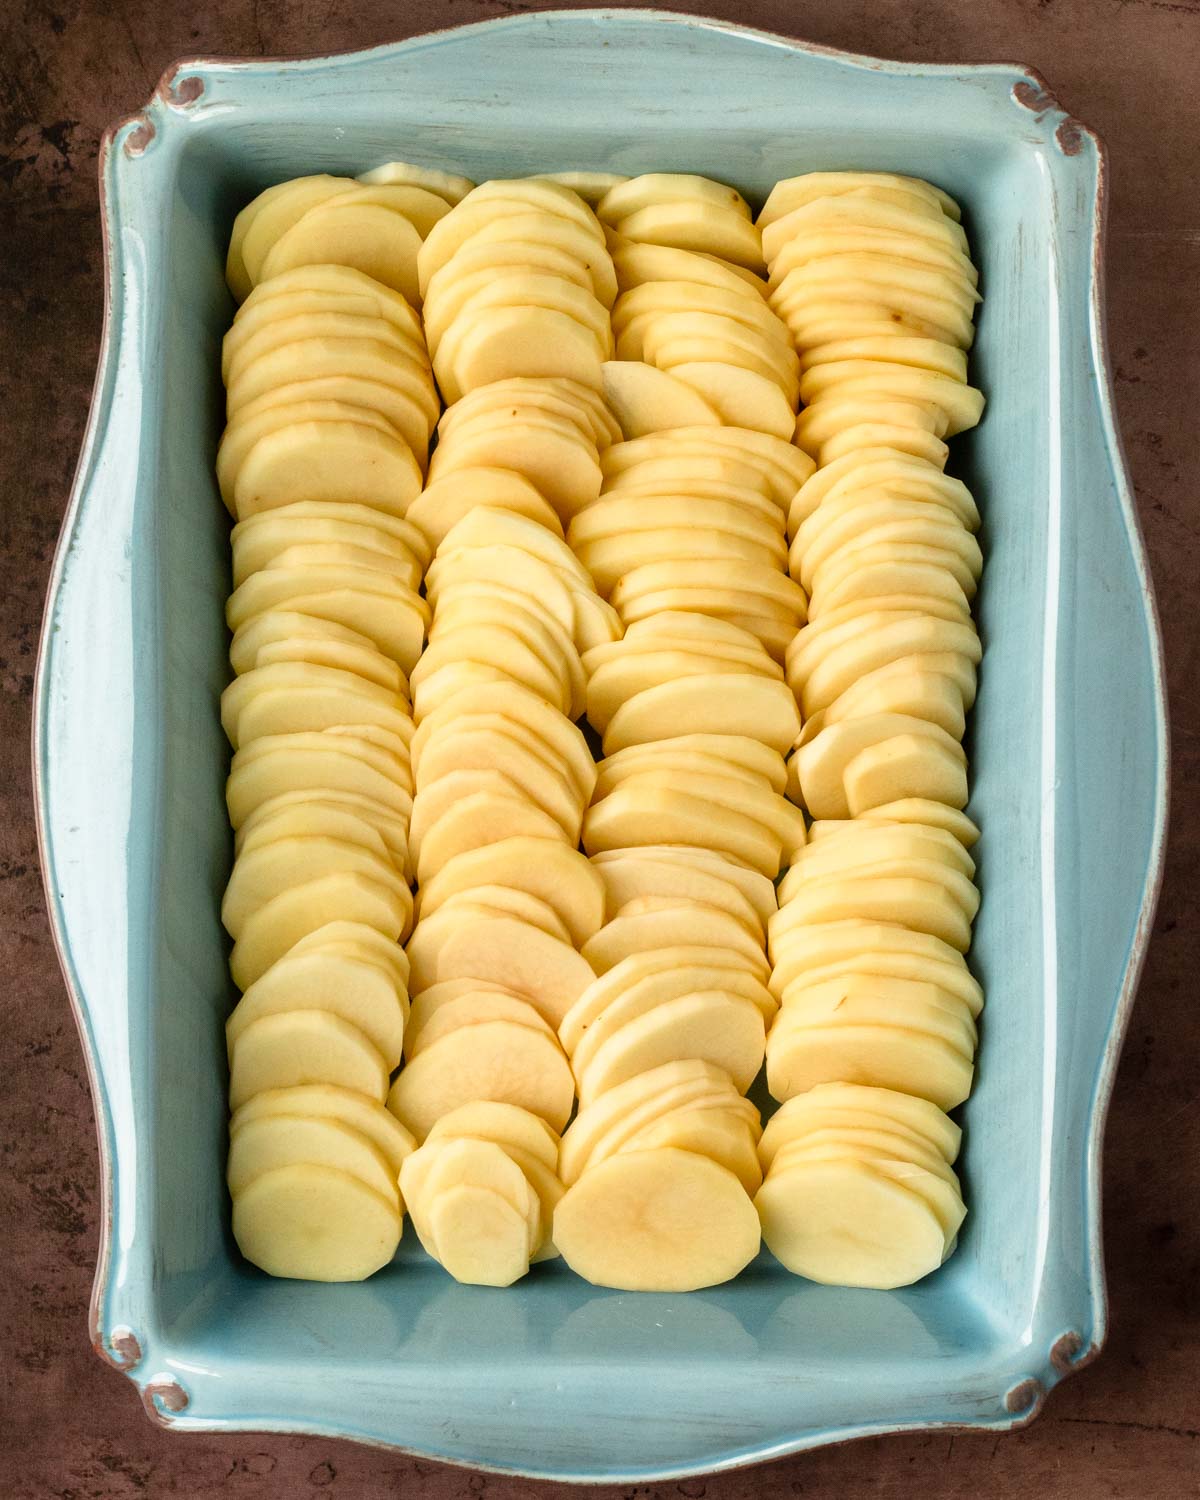 Step 1. Peel and slice the potatoes then arrange in the baking pan